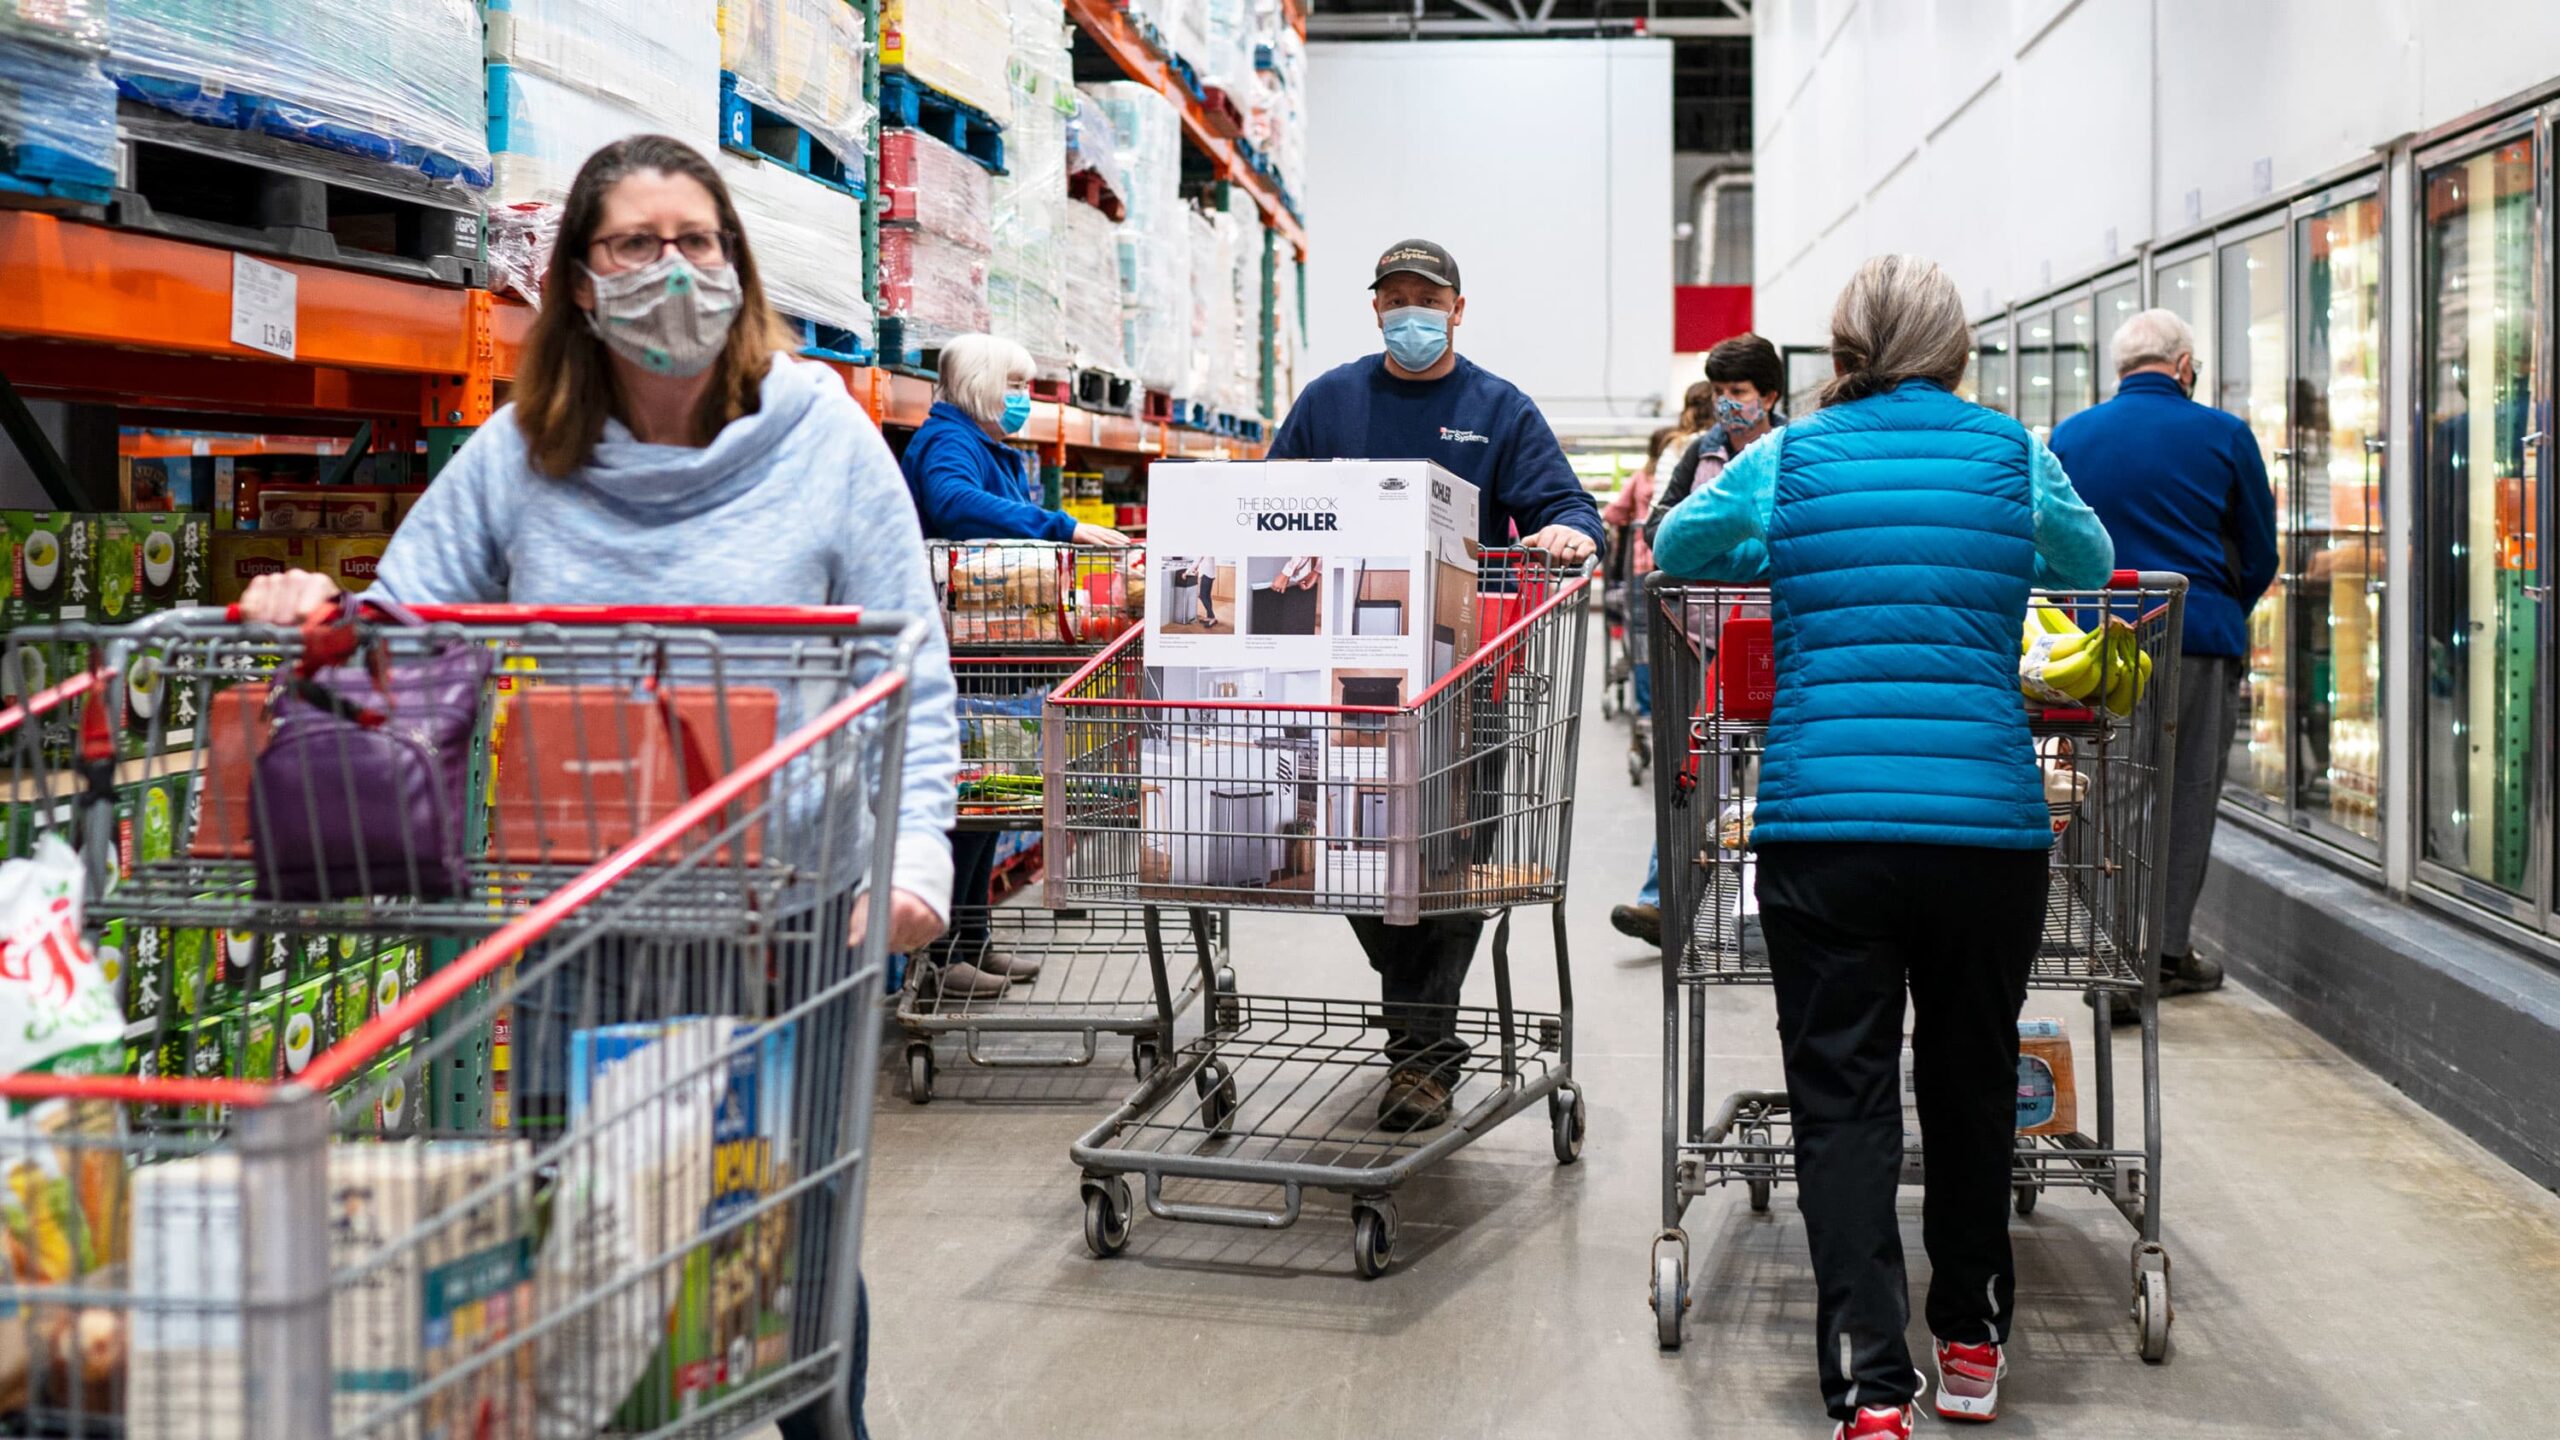 Costco, Nike can best weather supply chain disruptions, traders say